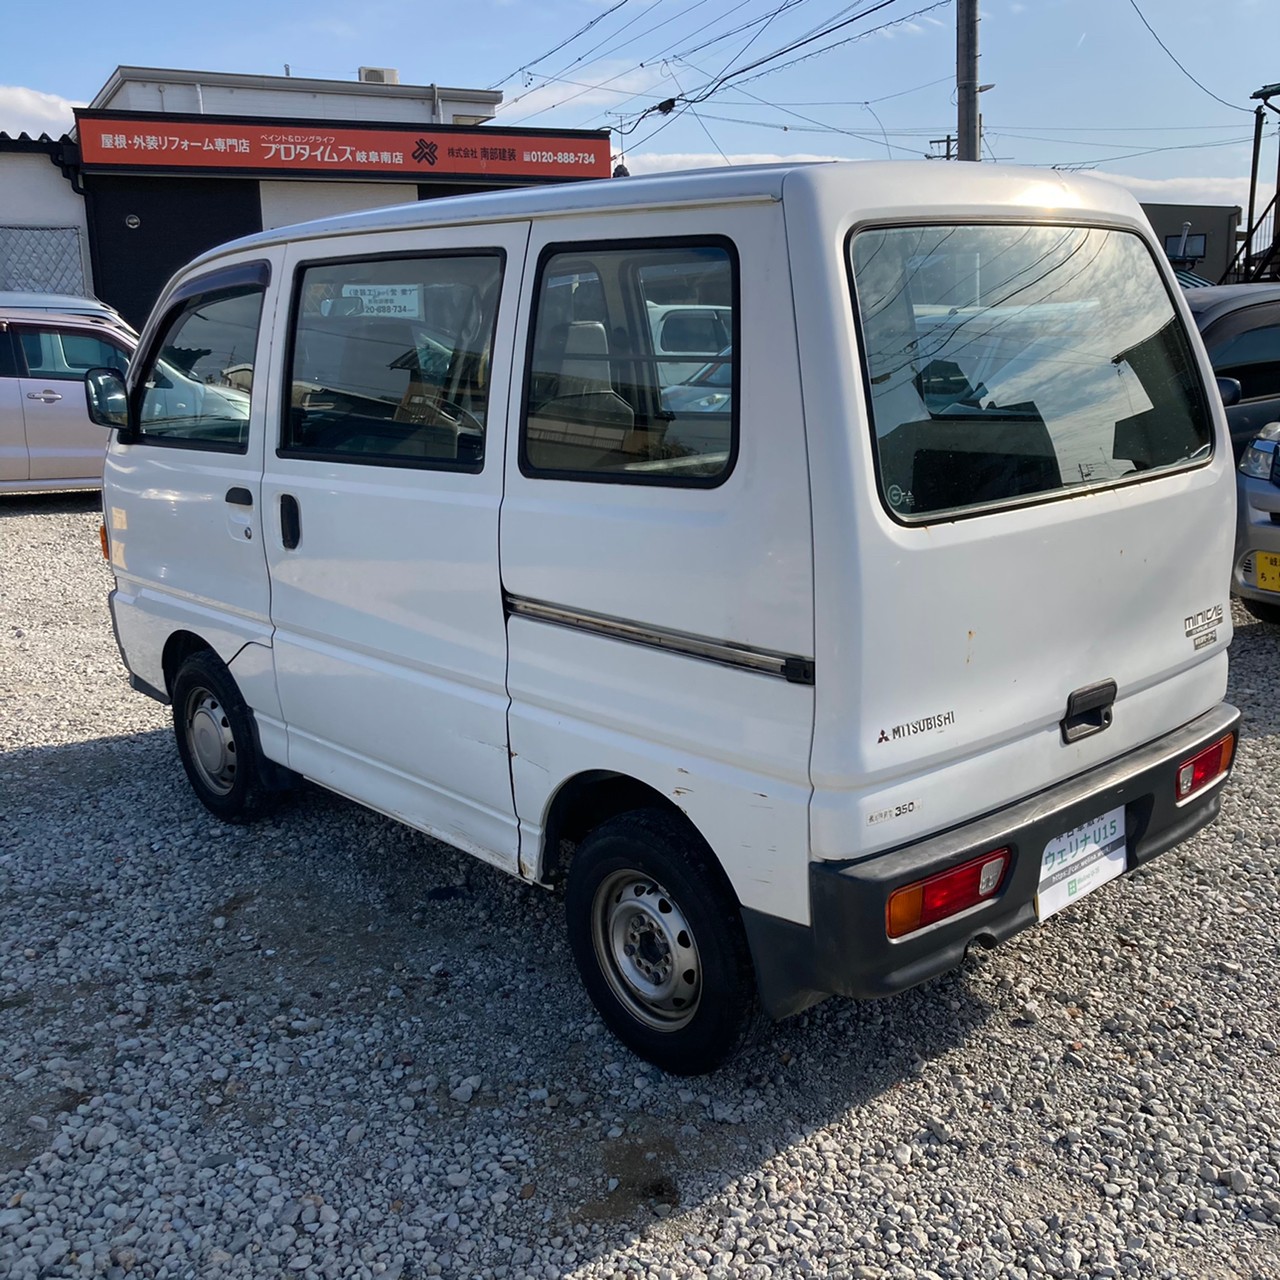 sold】総額9.0万円☆車検ロング☆4WD☆人気の軽箱バン☆平成9年式 三菱